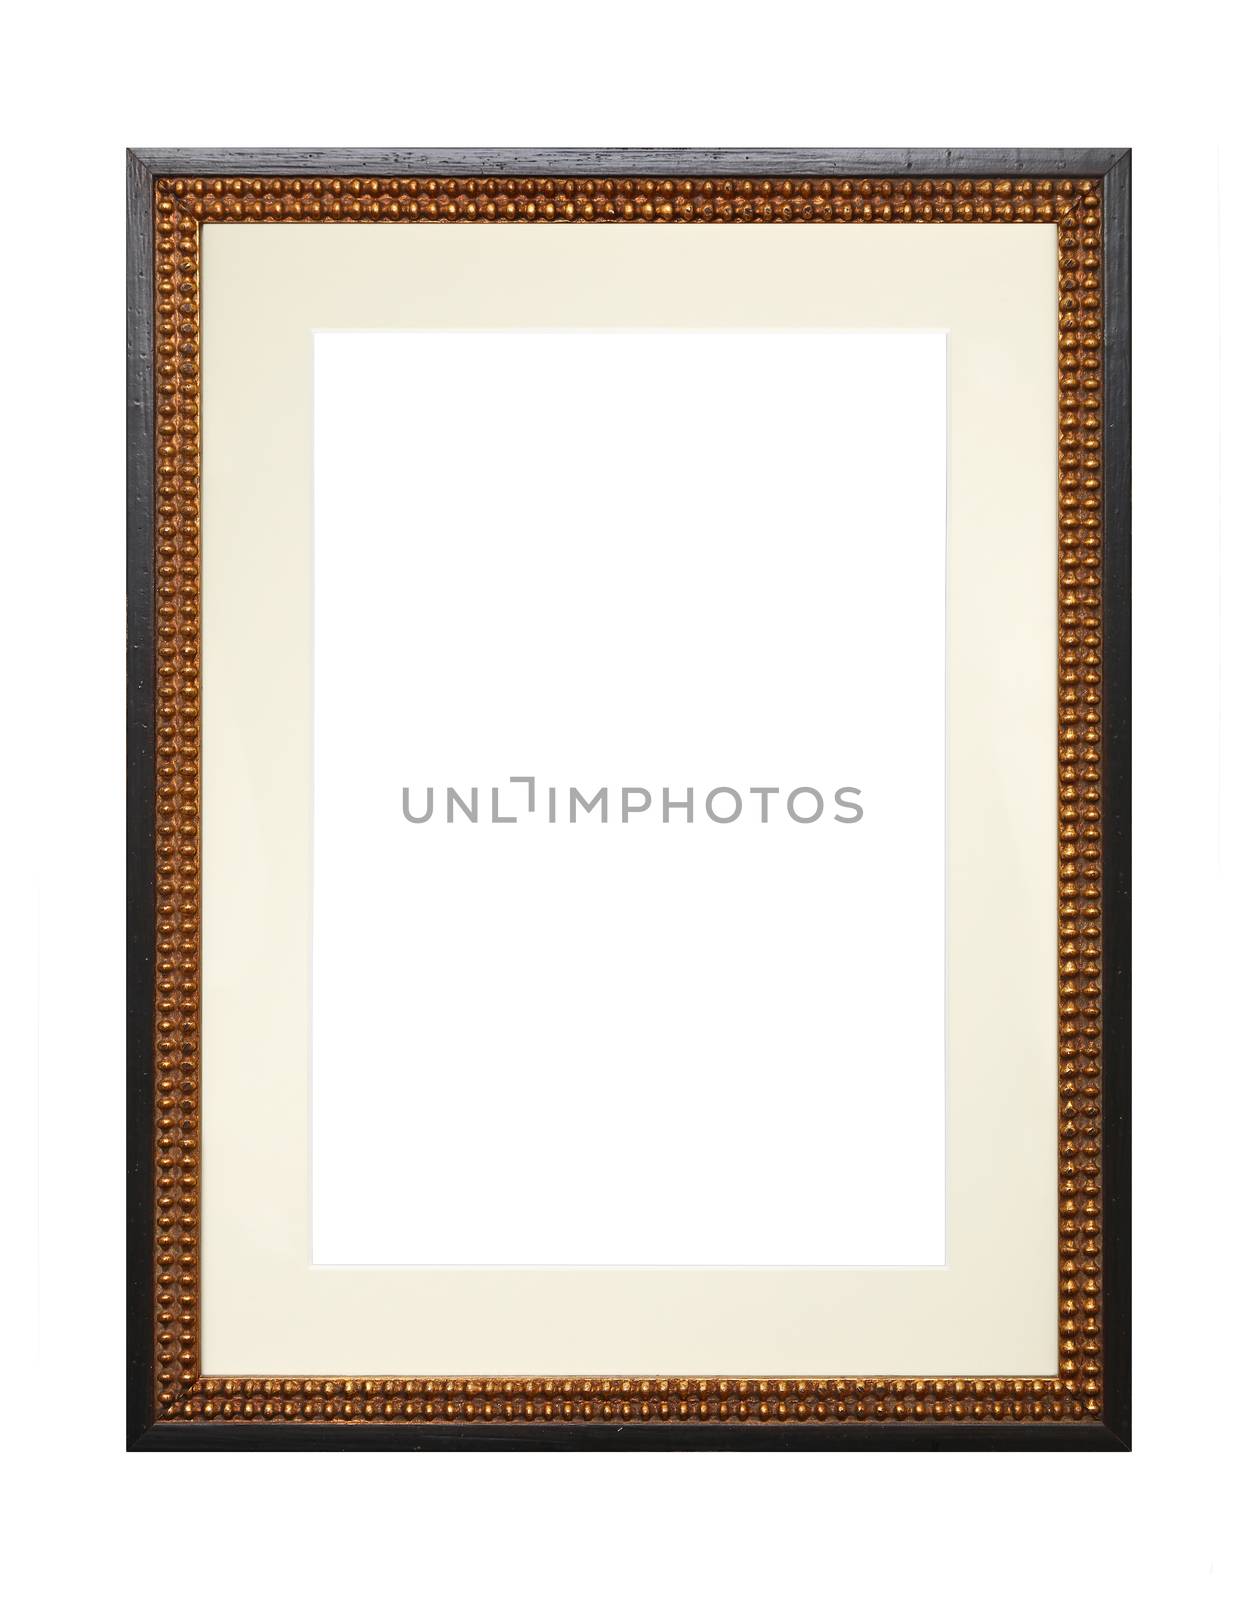 Vintage old wooden brown classic frame with golden inner edge and cardboard mat (passe partout mount) for picture or photo, isolated on white background, close up